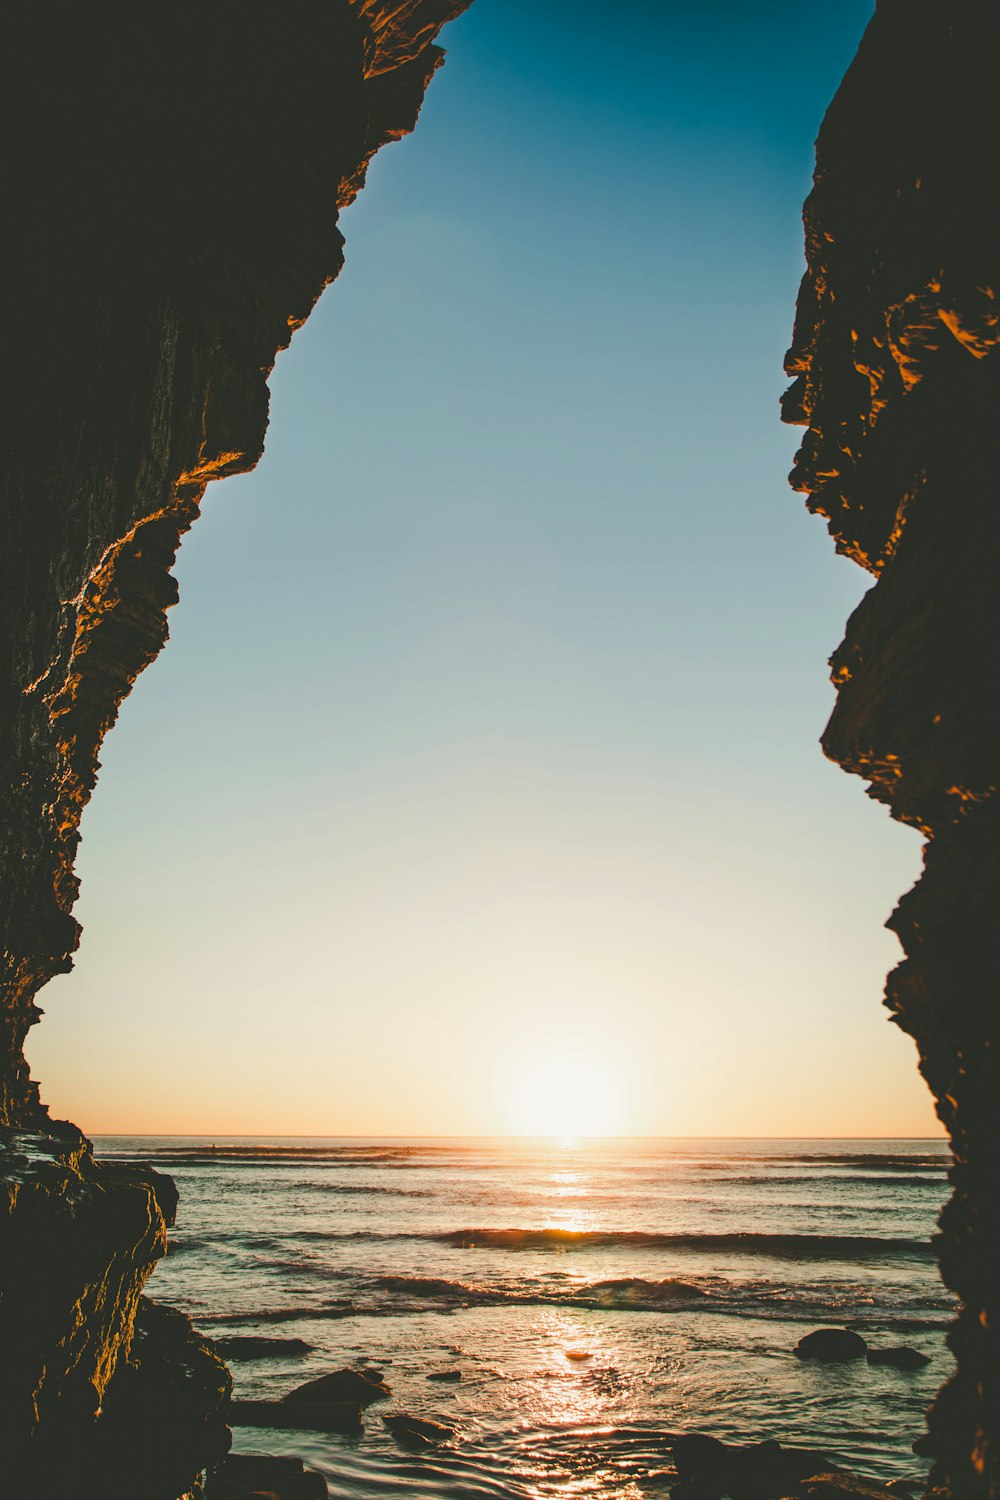 the sun is setting over the ocean from a cave